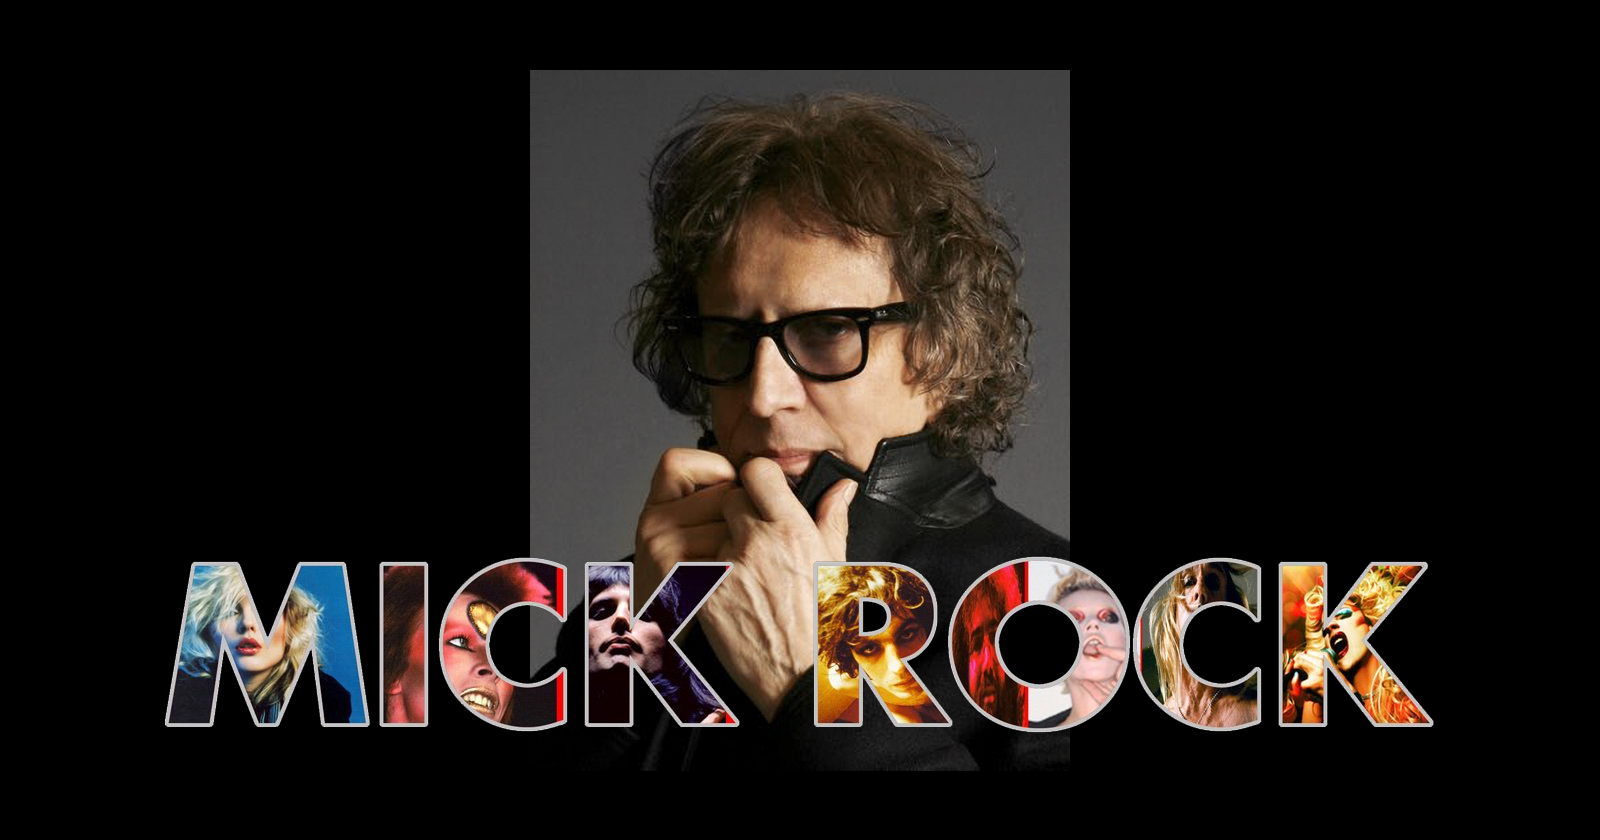 Photo of Mick Rock behind stylized text of his name